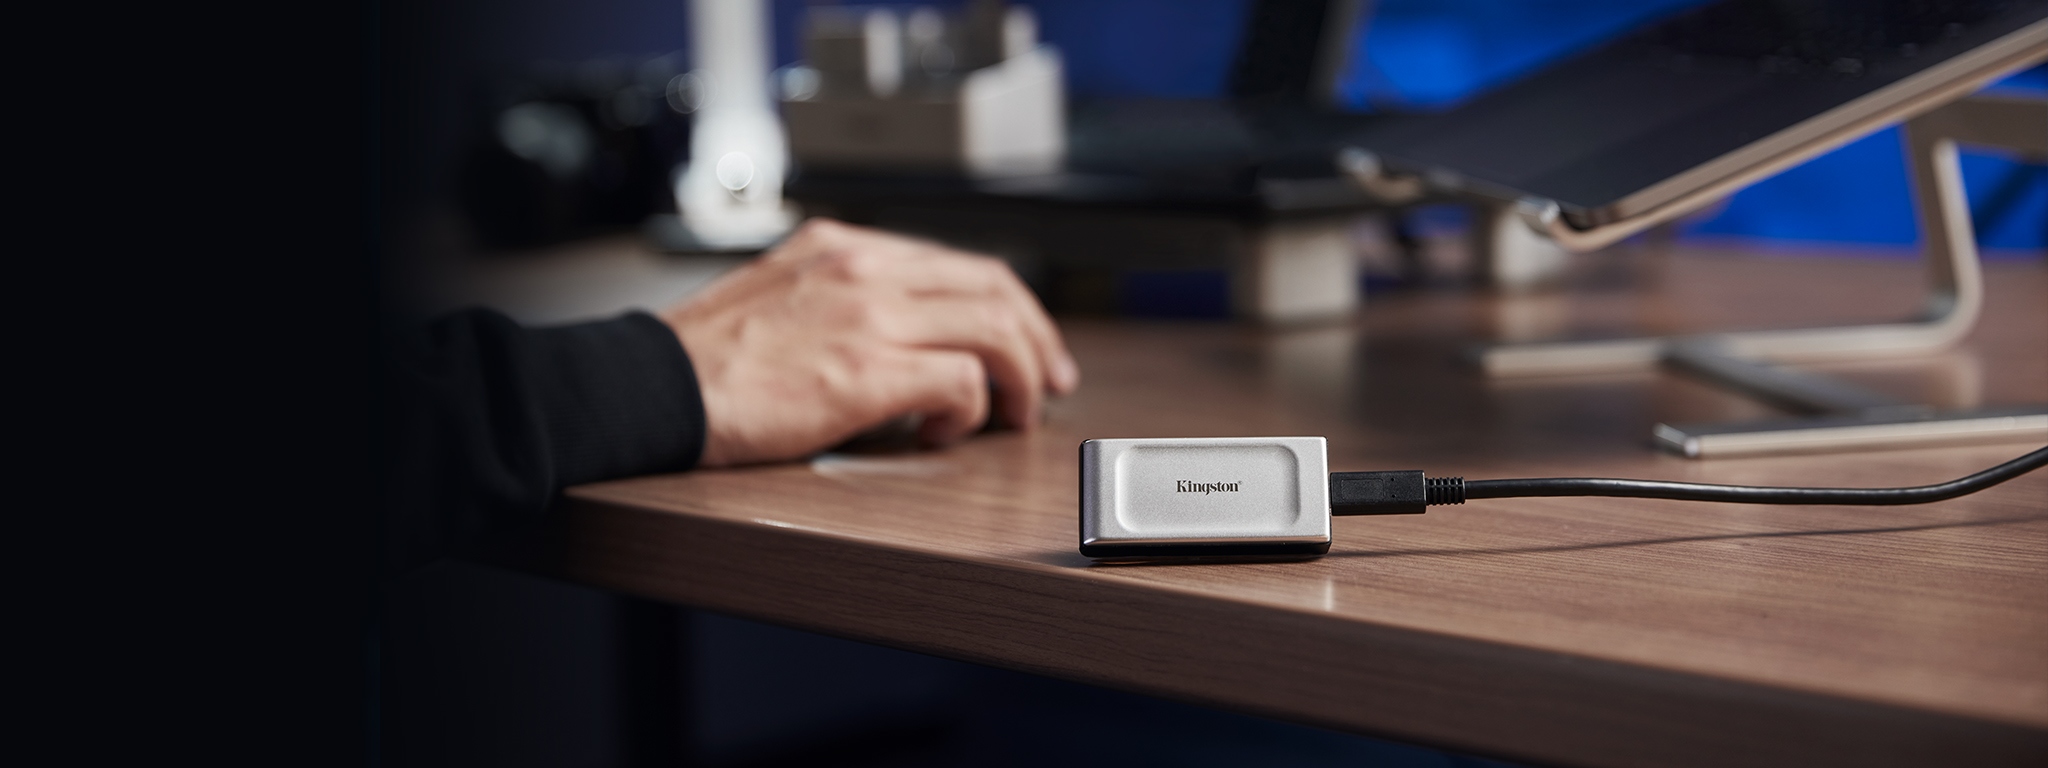 Kingston XS2000 review: Ultraportable SSD with blazing fast transfer speeds